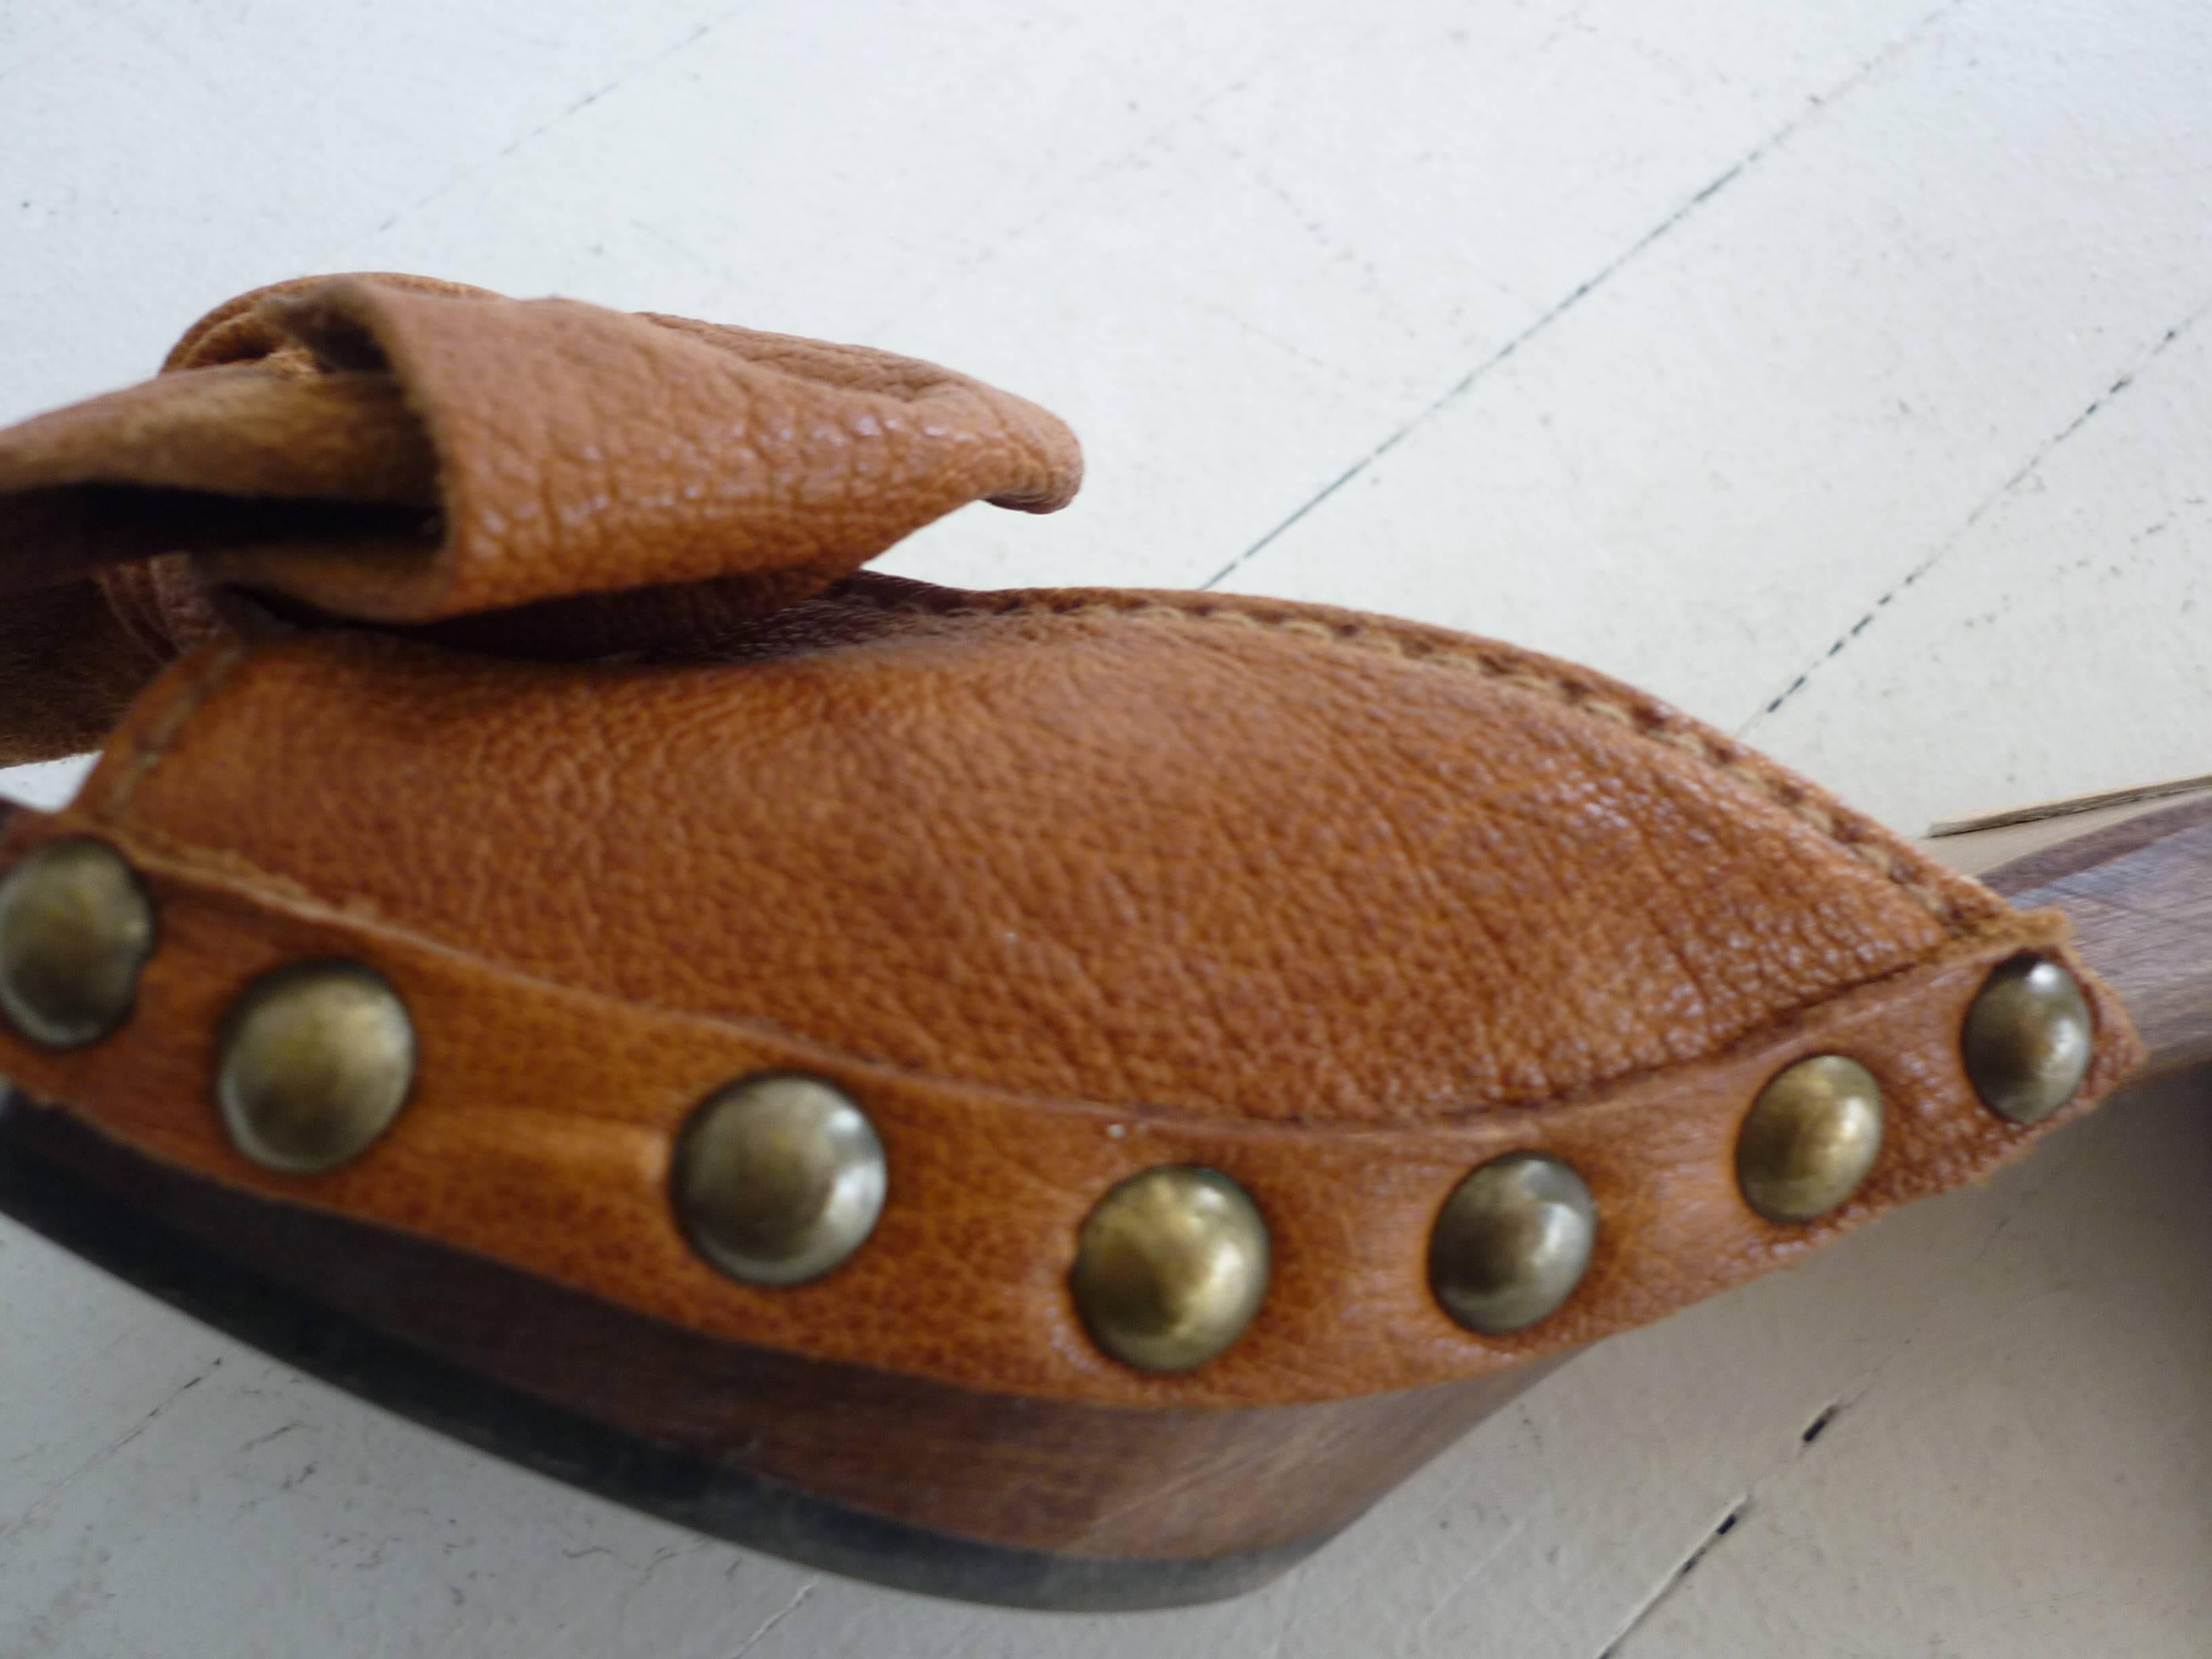 Brown Miu Miu Tan Leather Studded Clogs in As New Condition 37 1/2